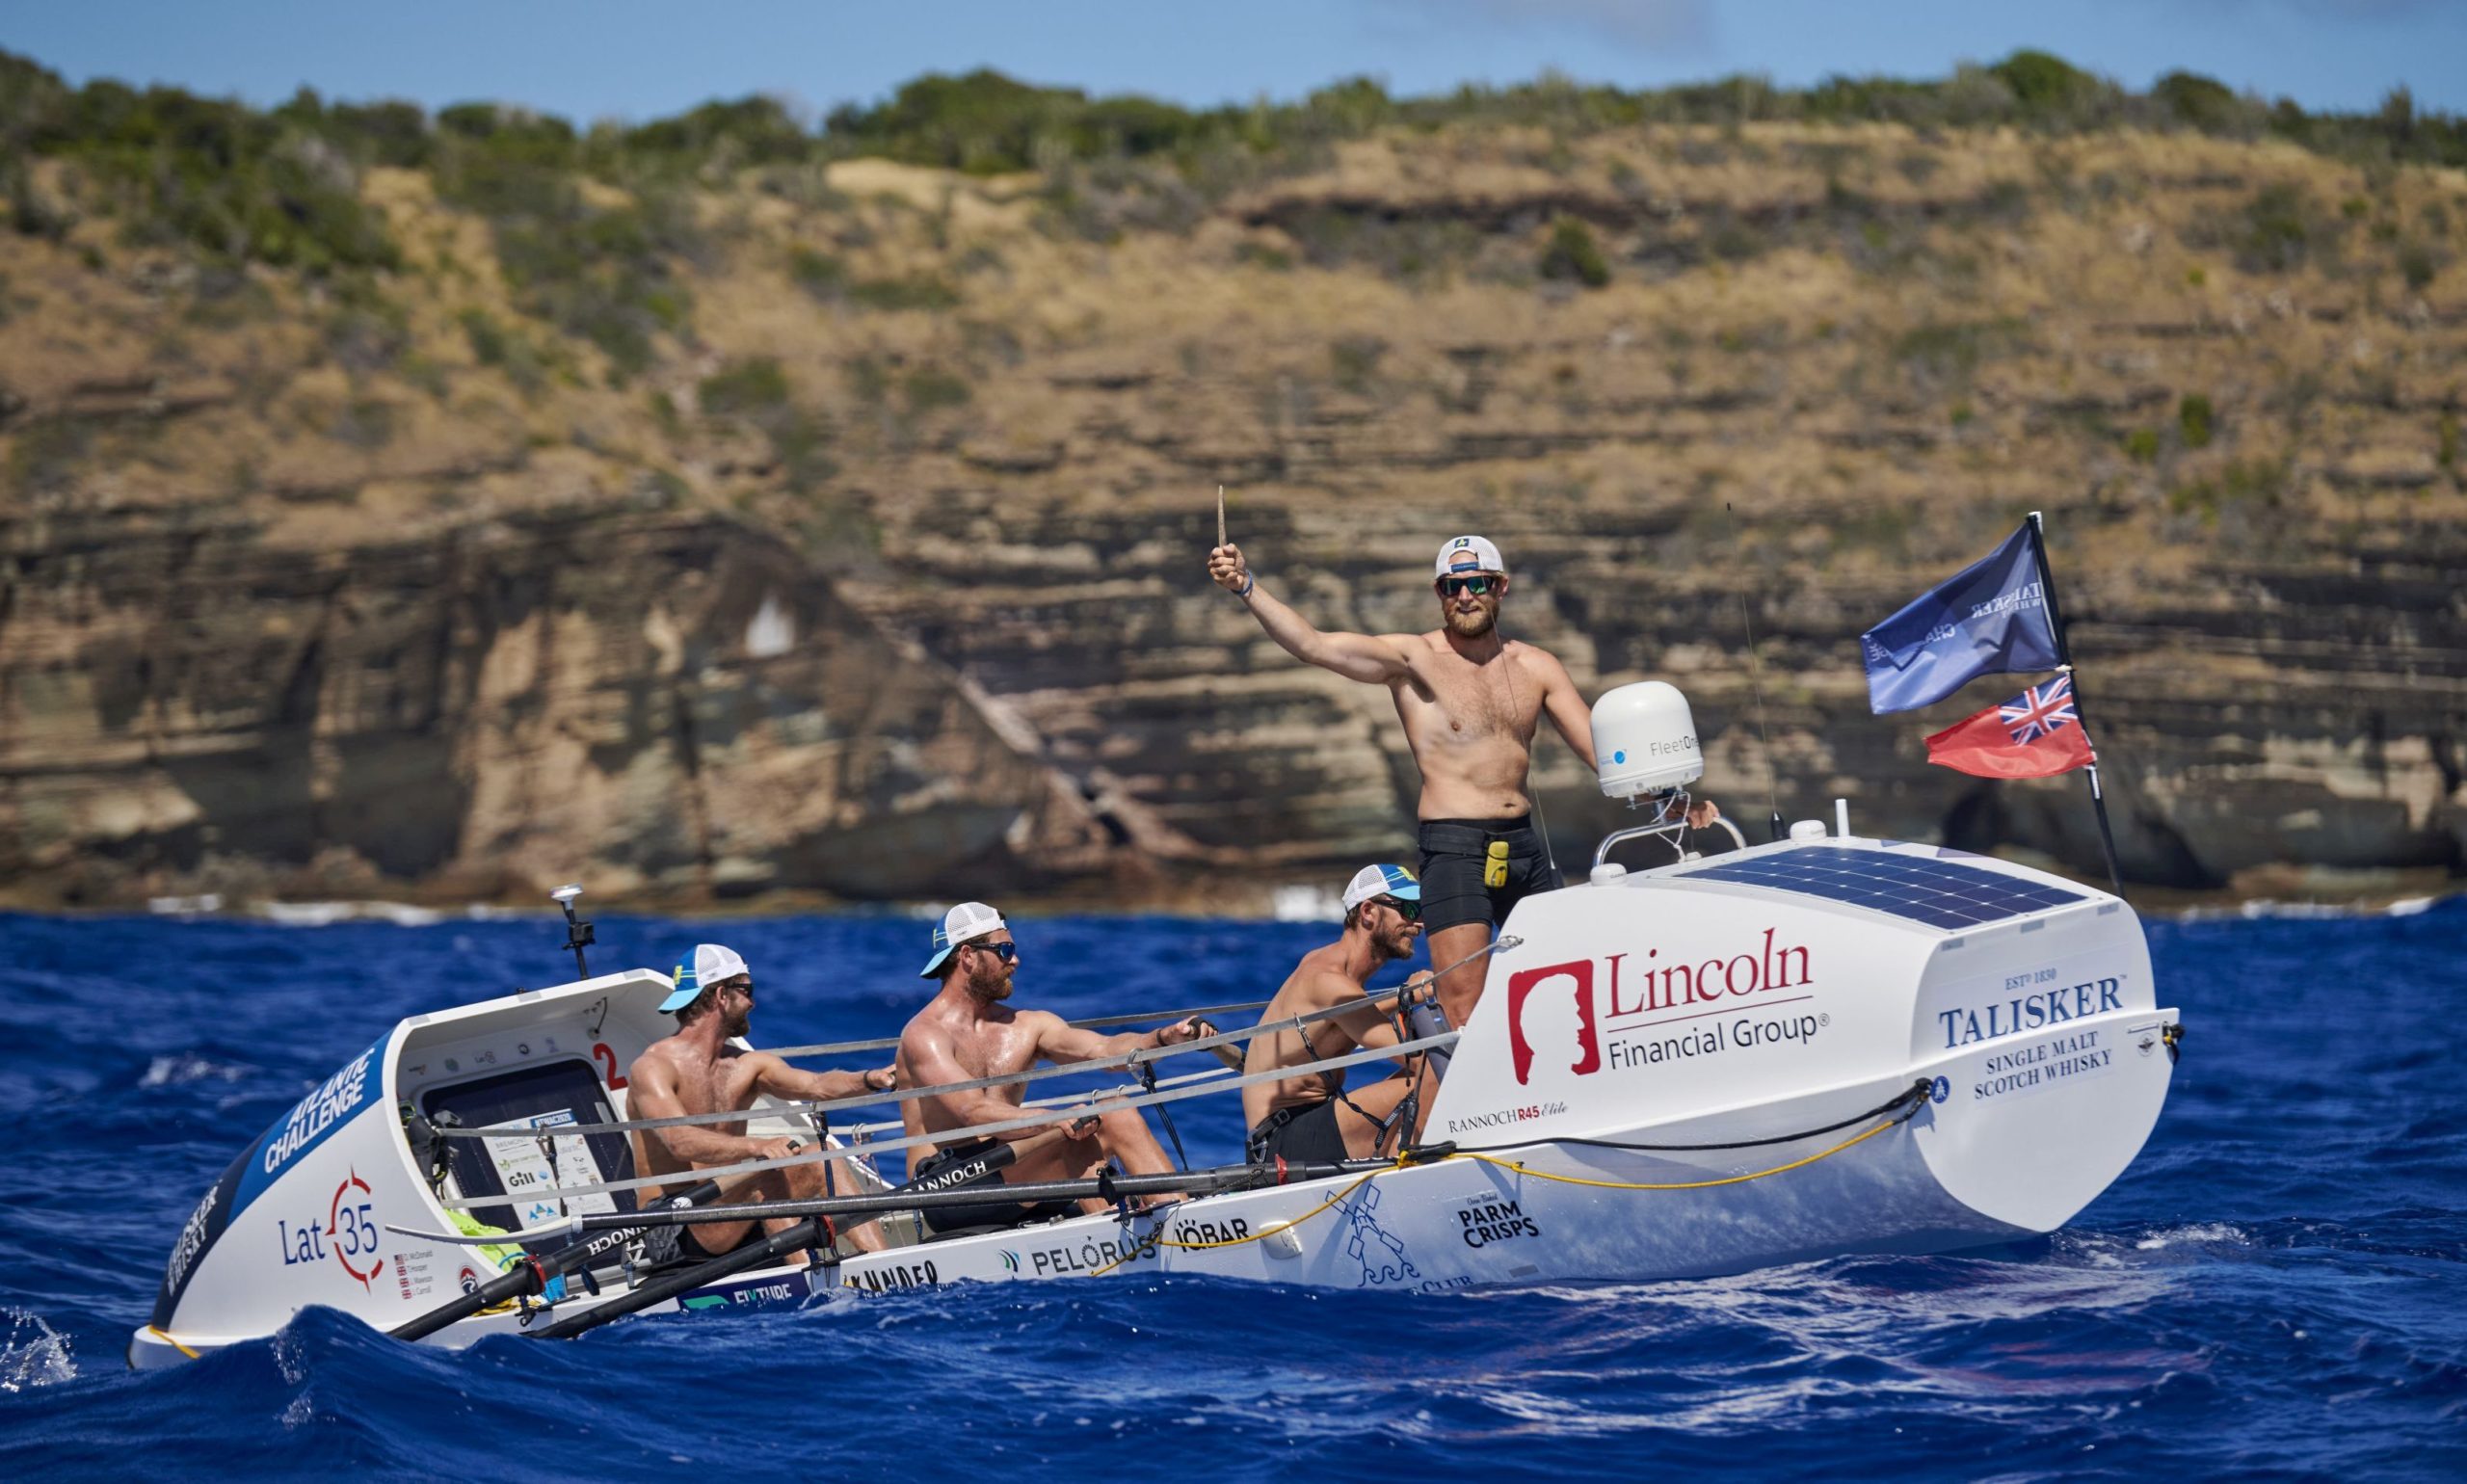 We talk with Jimmy Carroll, co-founder of travel company Pelorus, and a member of team Latitude 35, on marlin attacks, ocean conservation, and the challenges of rowing the Atlantic Ocean.